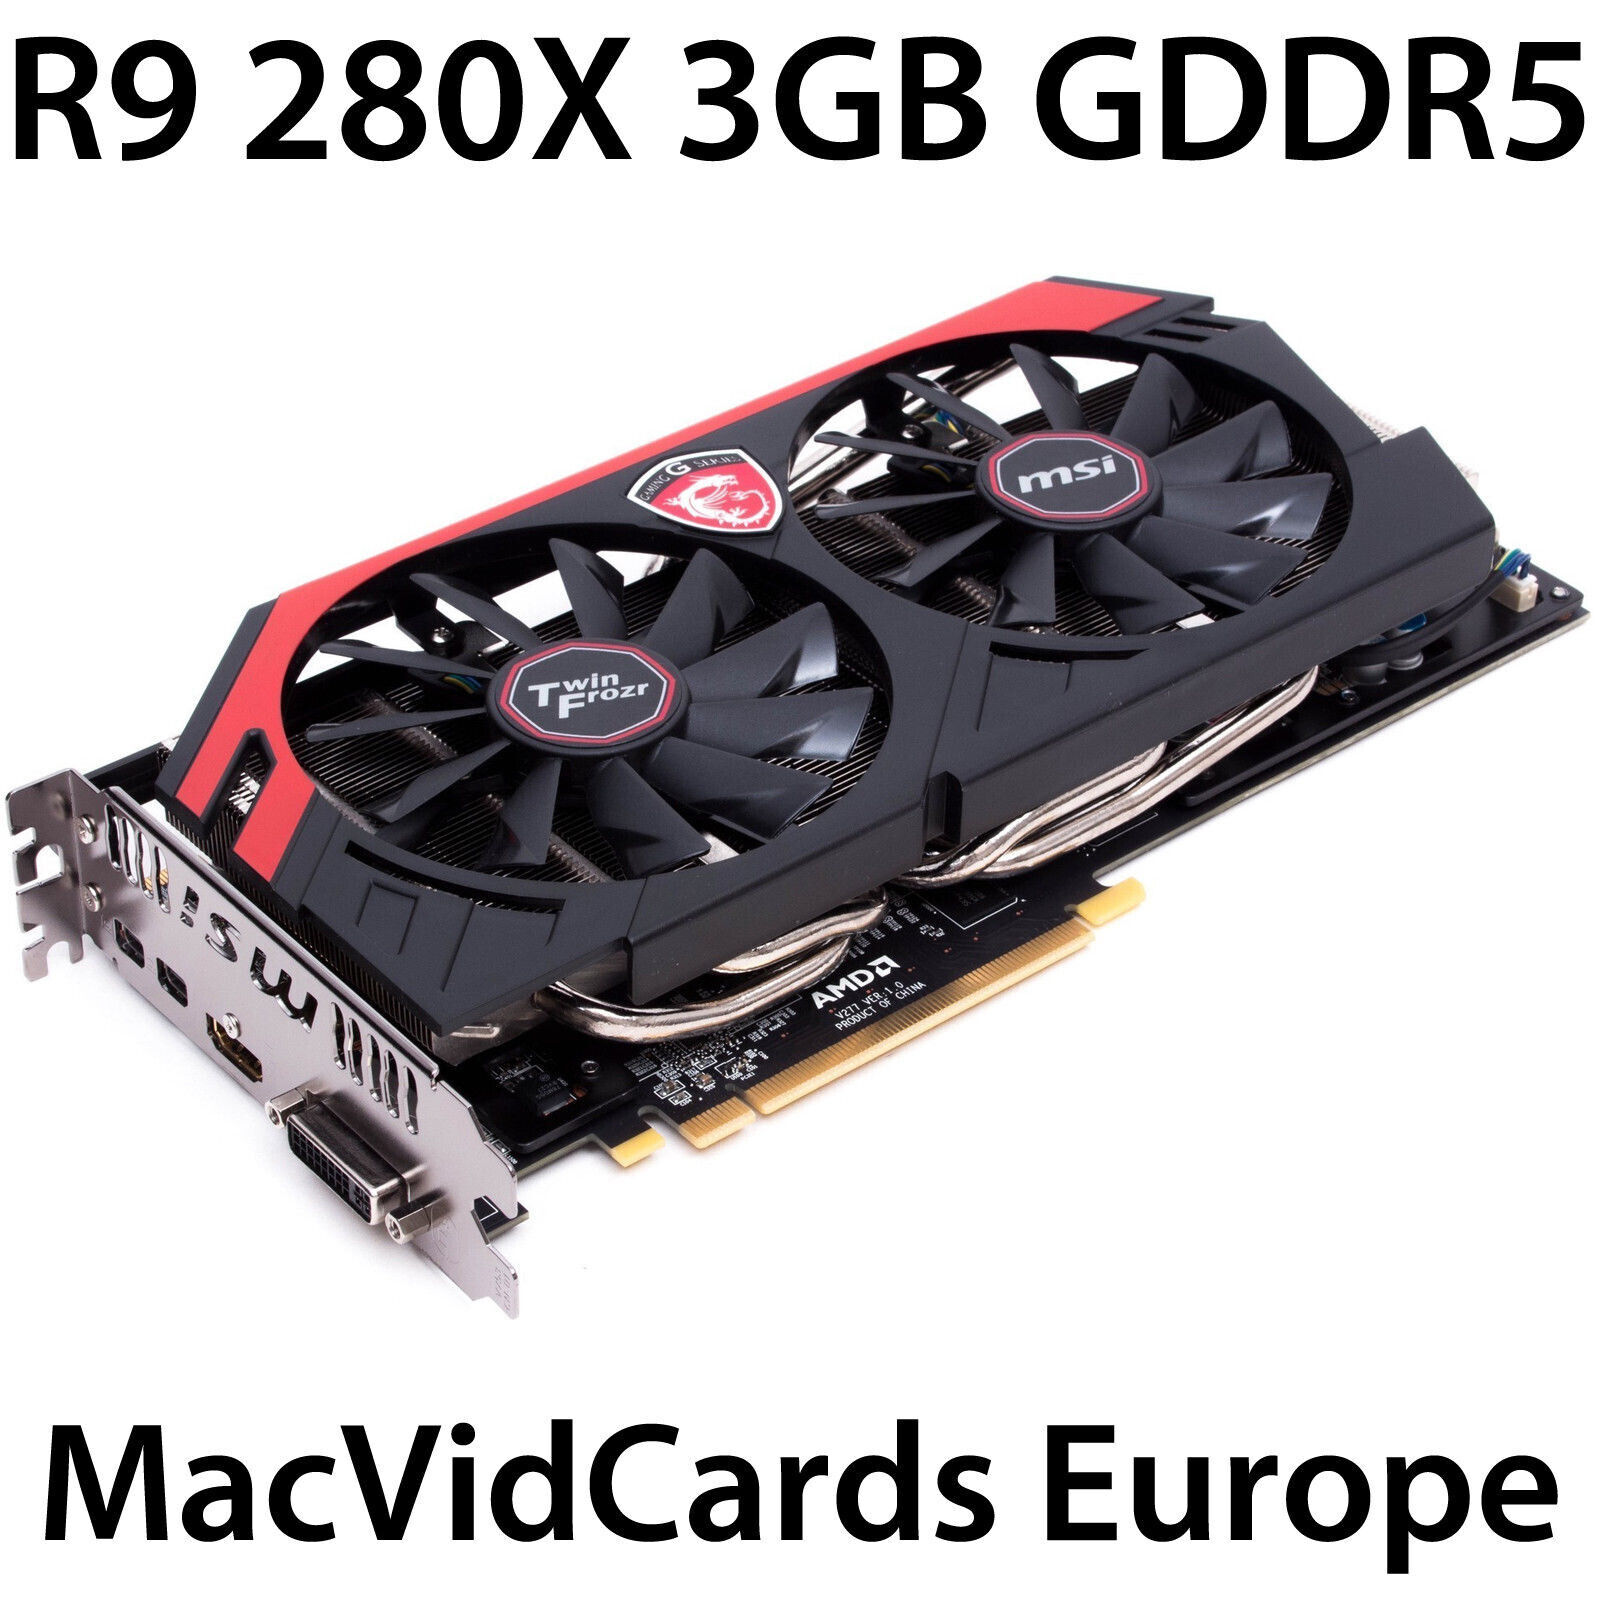 MacVidCards AMD Radeon R9 280X 3 GB GDDR5 for Apple Mac Pro with EFI BOOT SCREEN